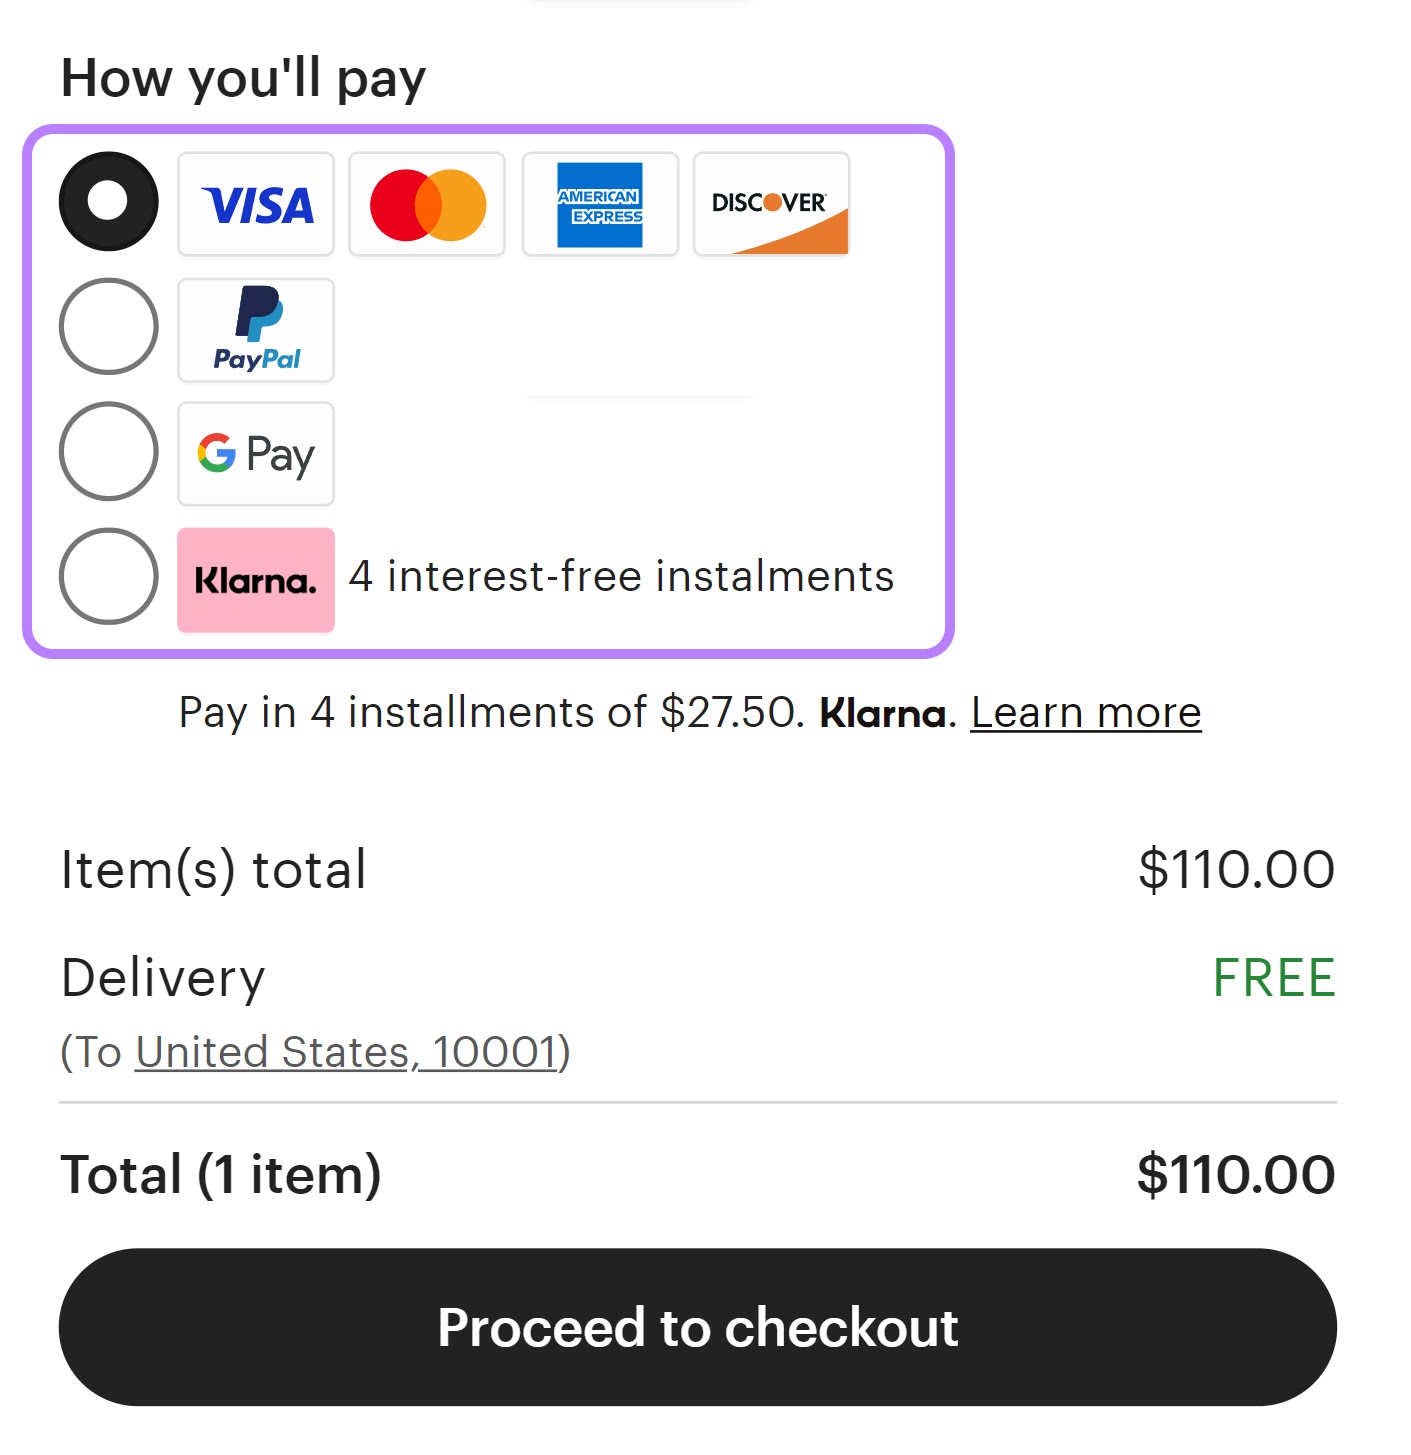 Multiple payment options offered at checkout